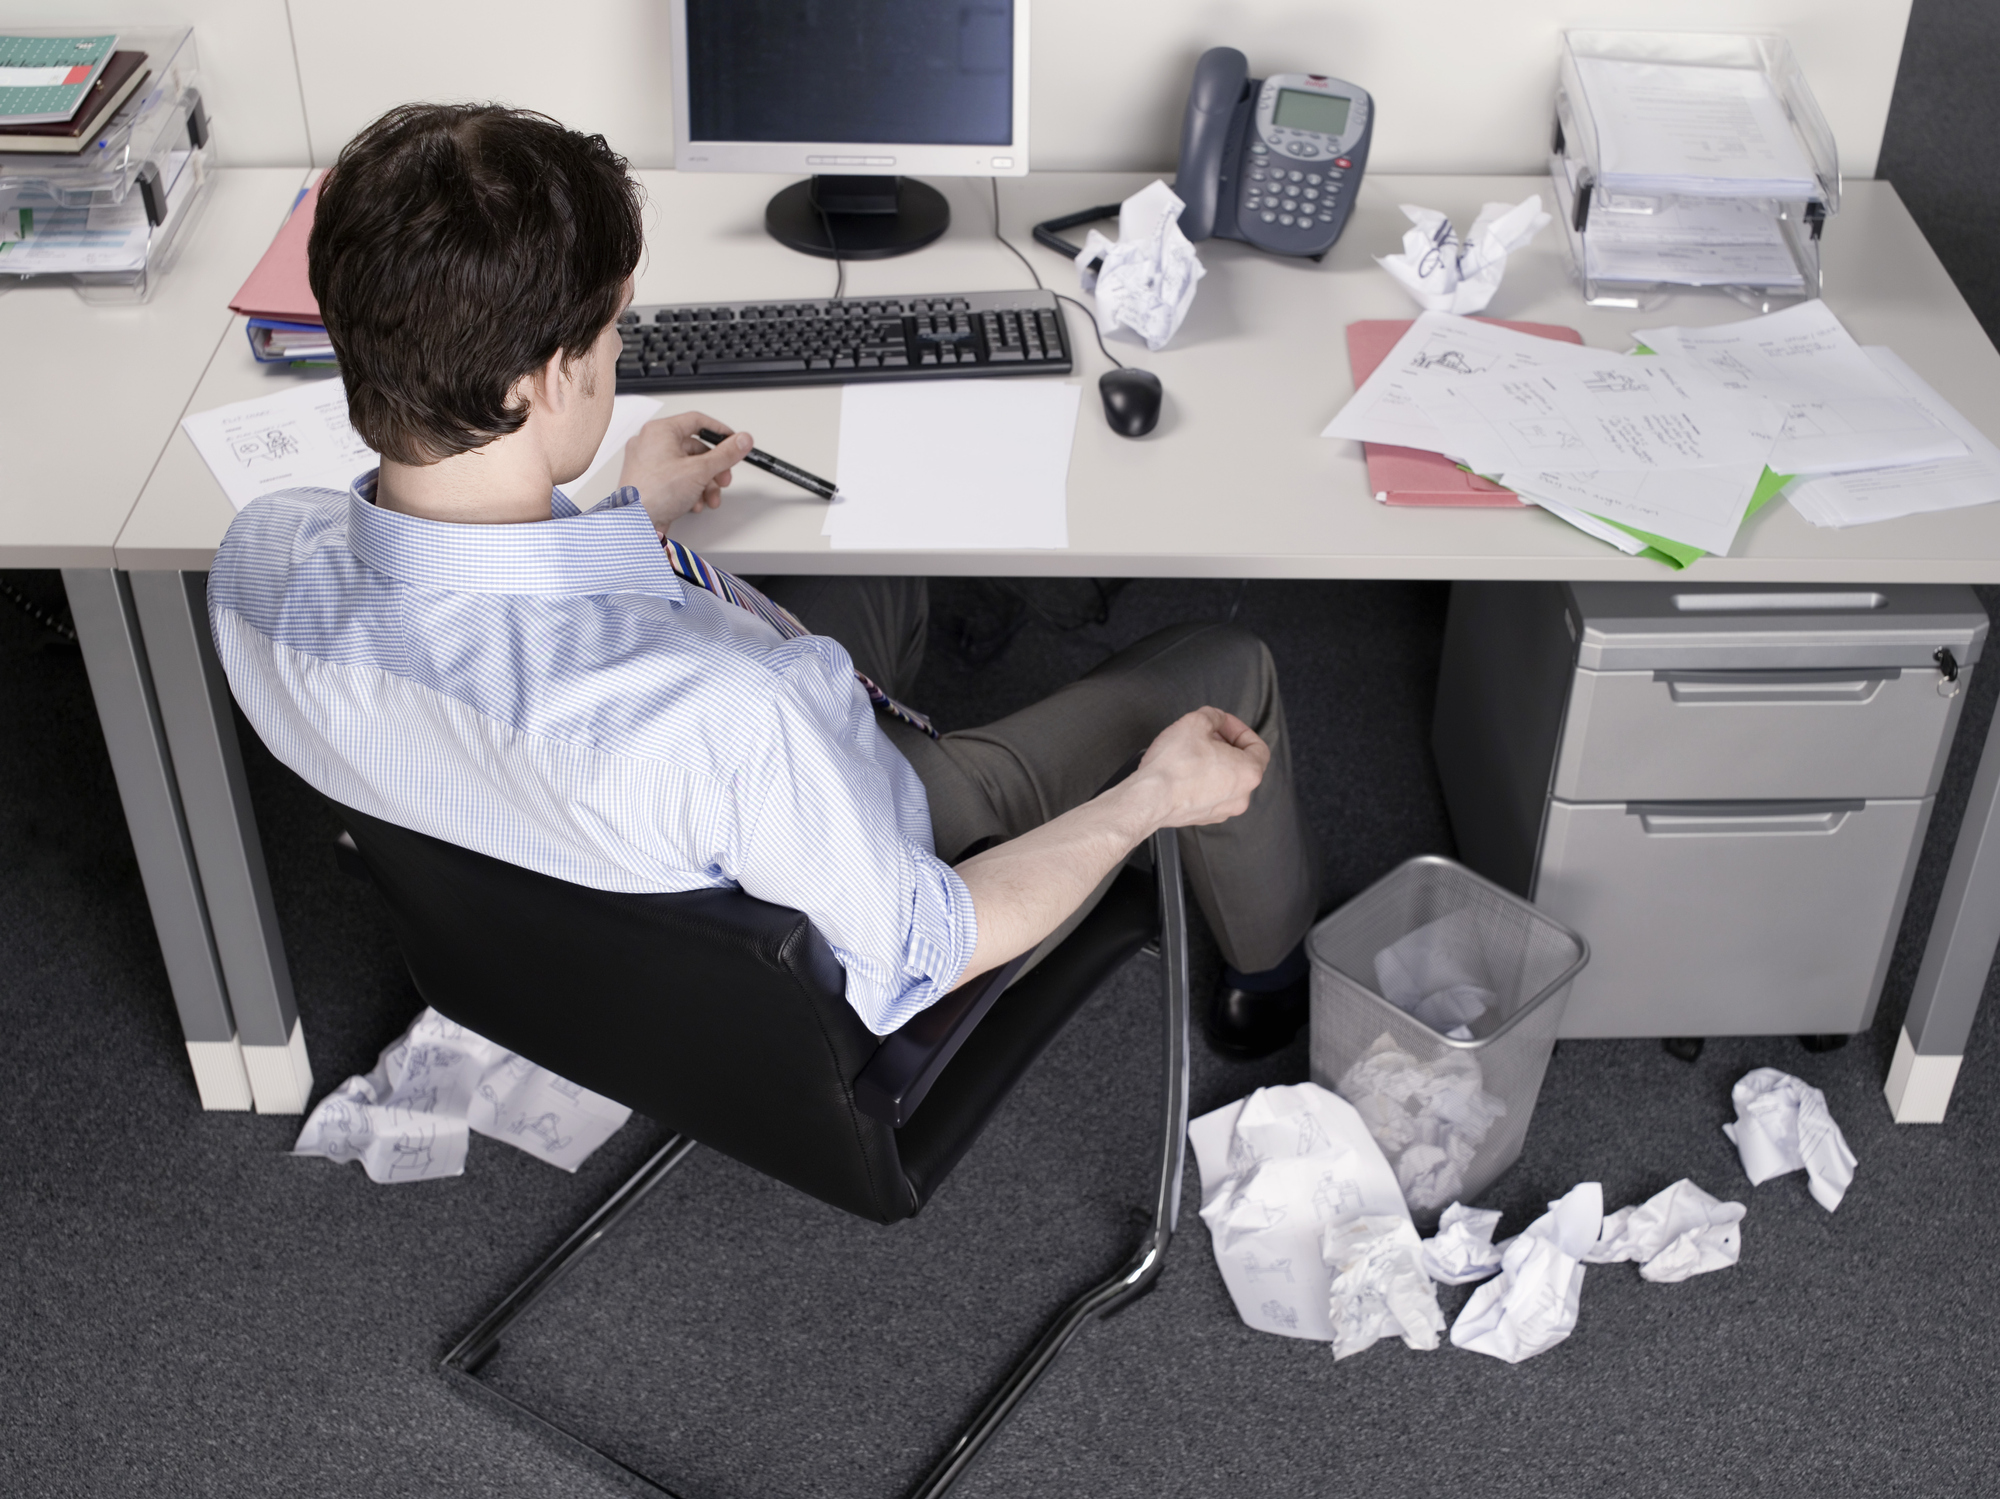 Man sitting at desk with crumpled-up papers littering the ground around him